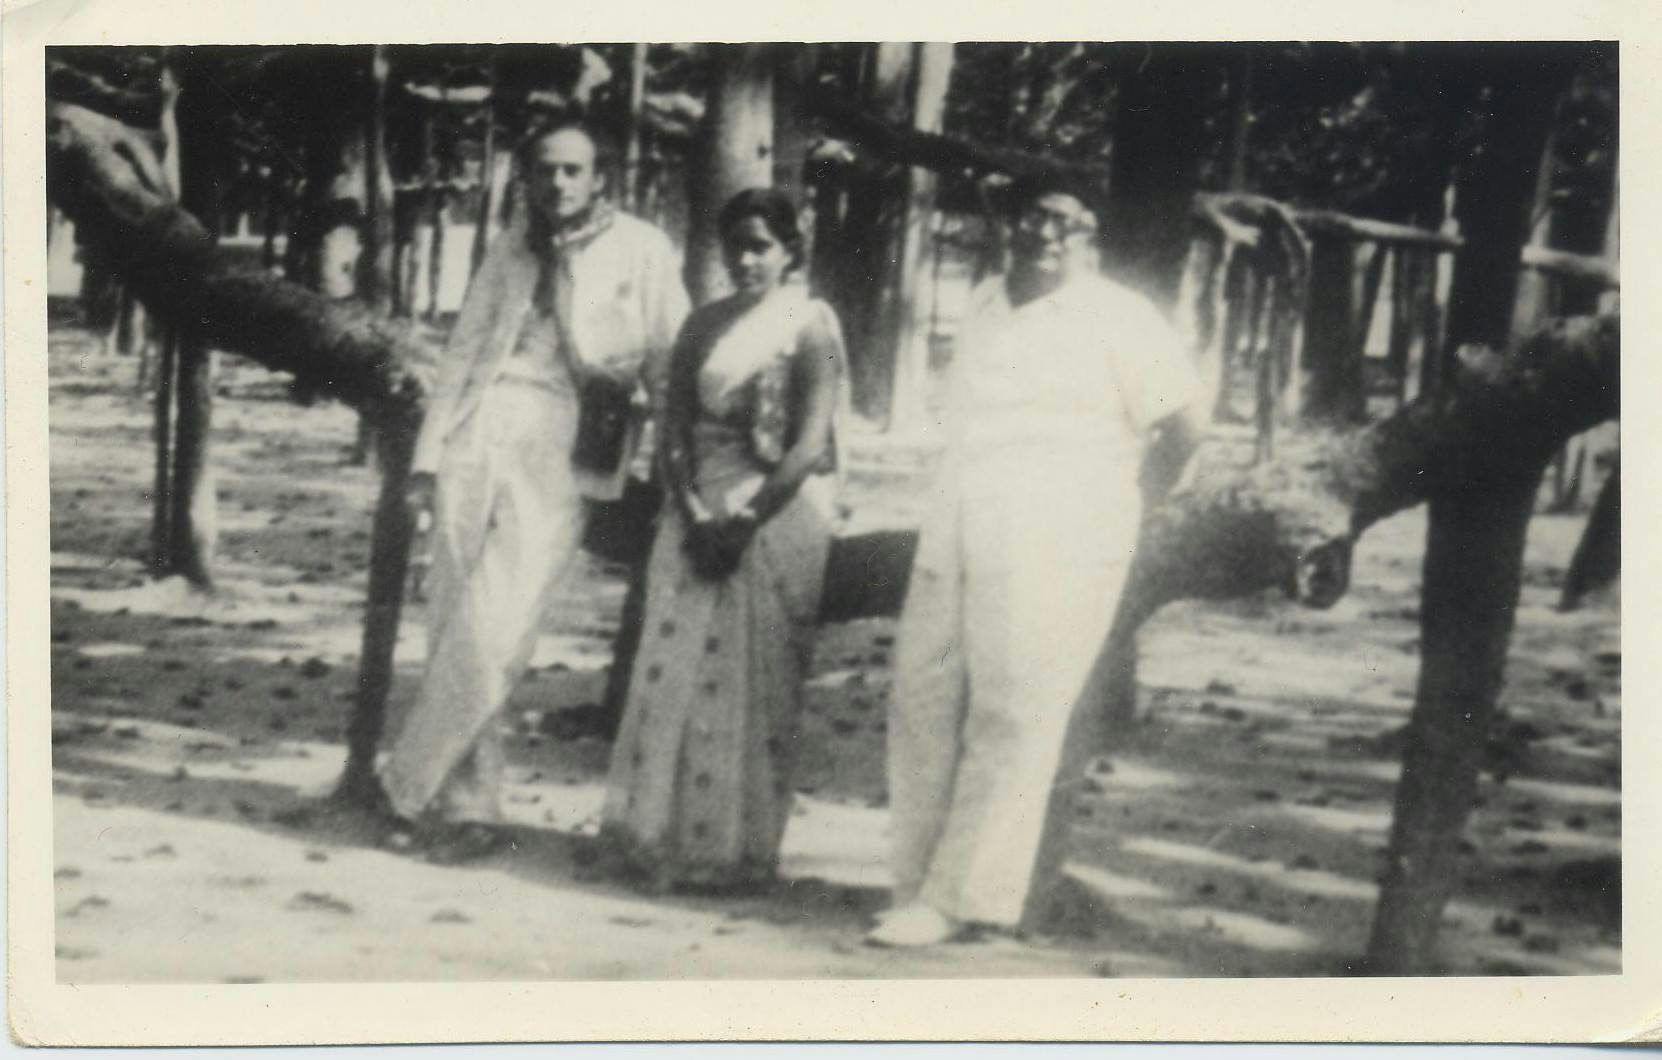 Dr Purnima Sinha with Prof SN Bose and Prof. PAM Dirac at Botanical Gardens in Calcutta during the latter’s visit in 1954